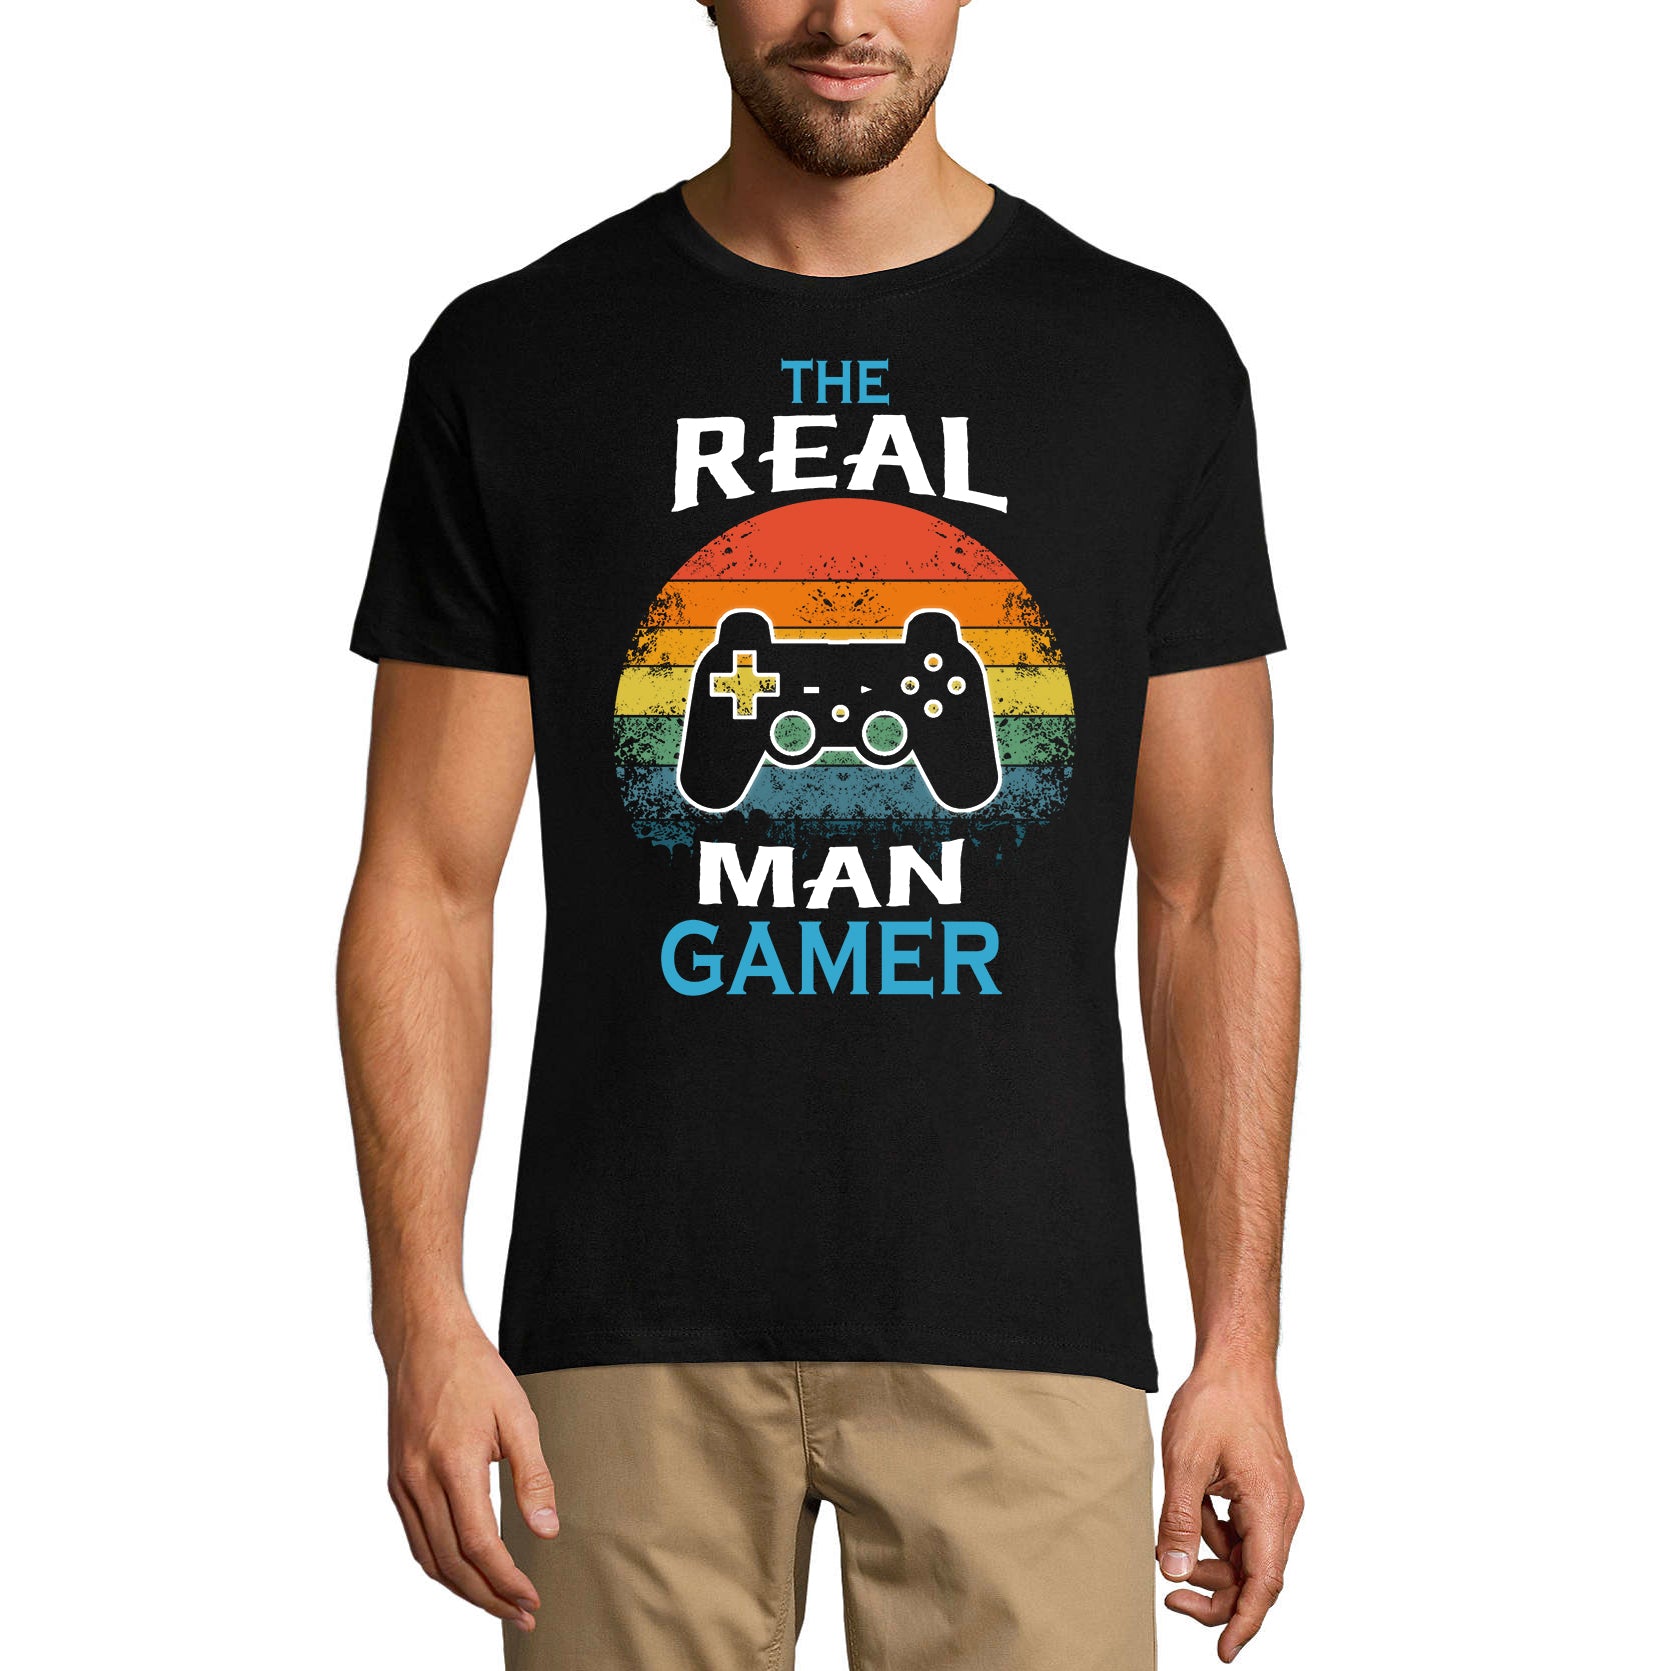 ULTRABASIC Men's T-Shirt Real Men Gamer - Gaming Shirt For Men - Graphic Apparel real men gamer paused my game alien player ufo playstation tee shirt clothes gaming apparel gifts super mario nintendo call of duty bros graphic tshirt men video game funny geek gift for the gamer fortnite pubg humor son father dad birthday vintage